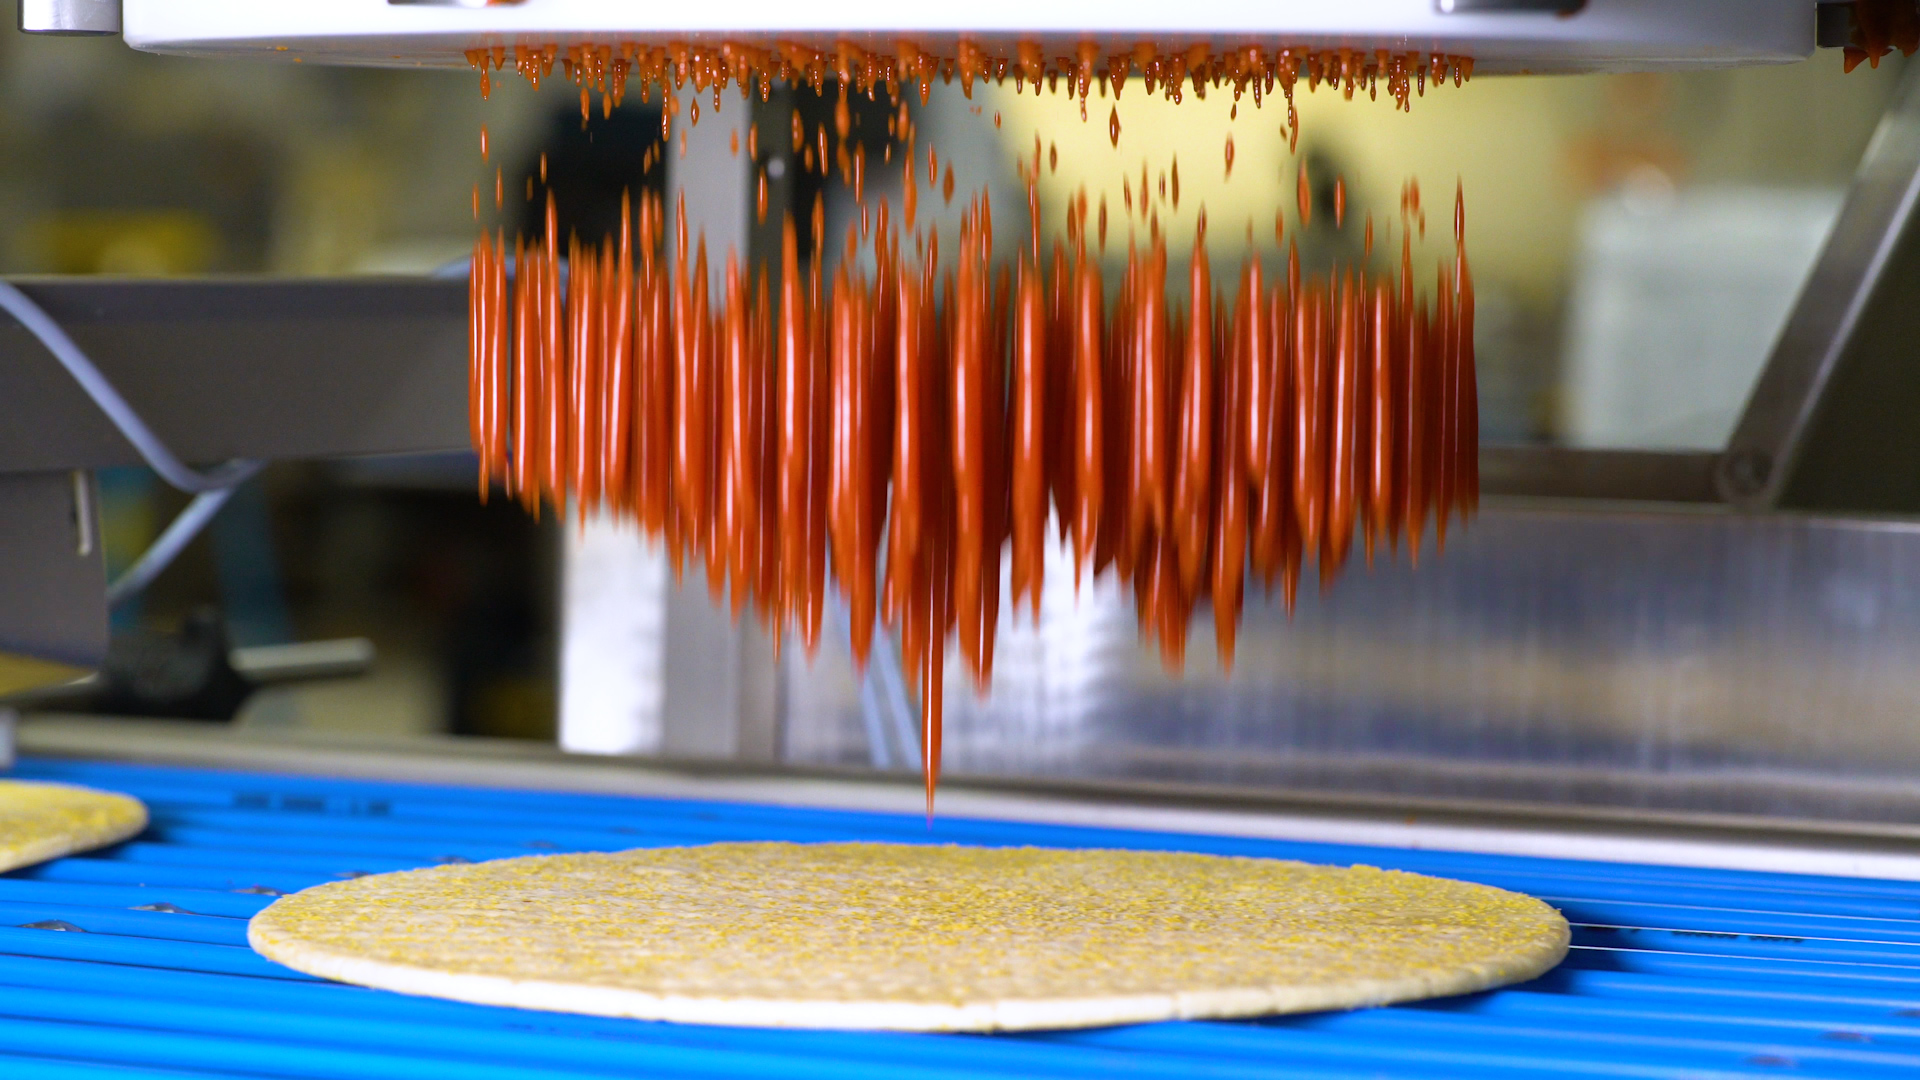 Sauce being applied to a pizza crust from a sauce applicator machine. 